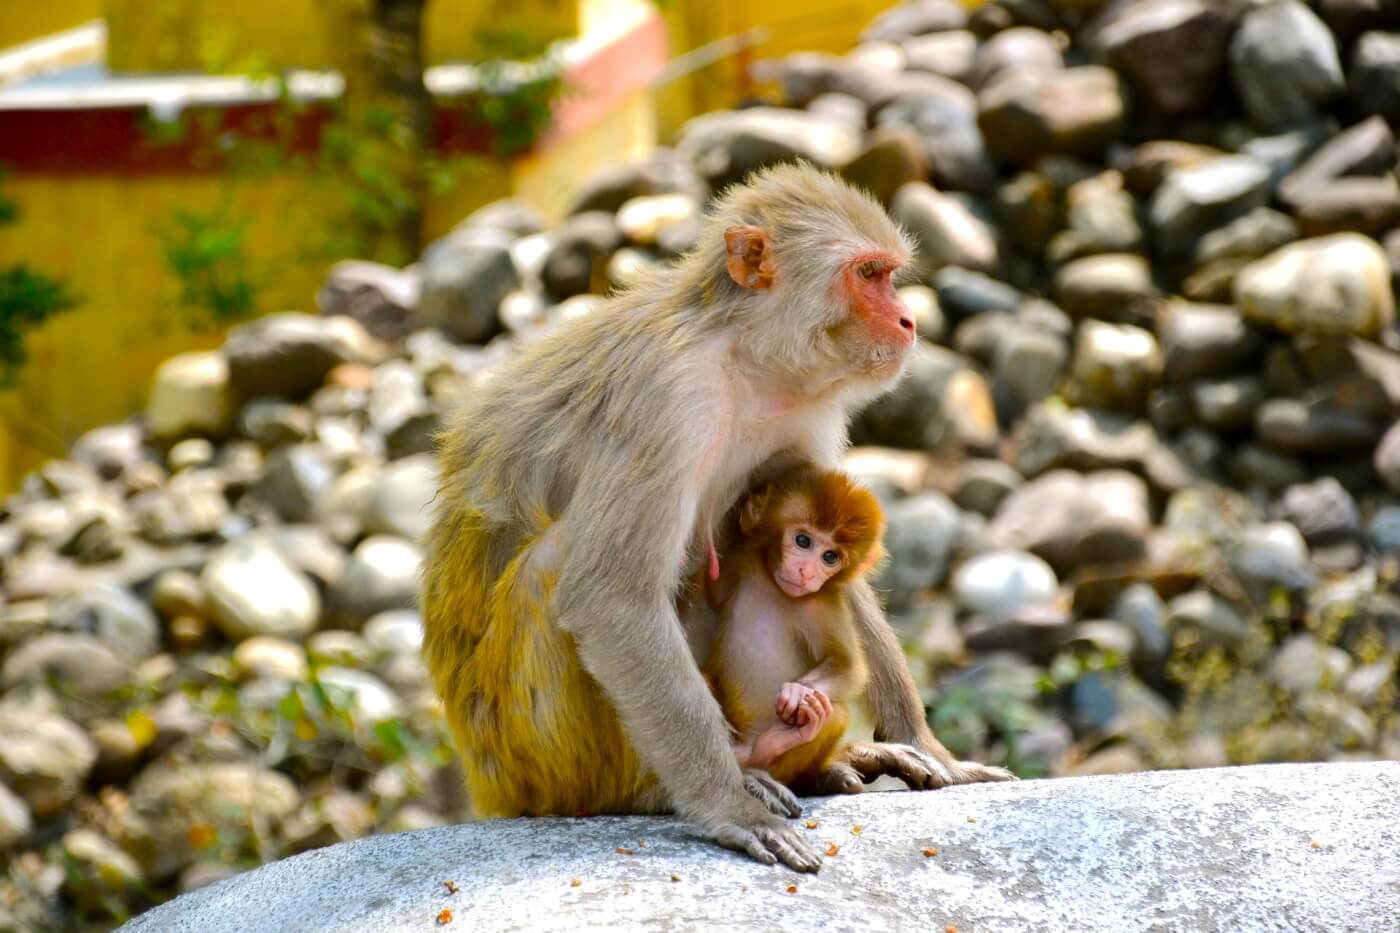 Macaque and her baby sit on rock